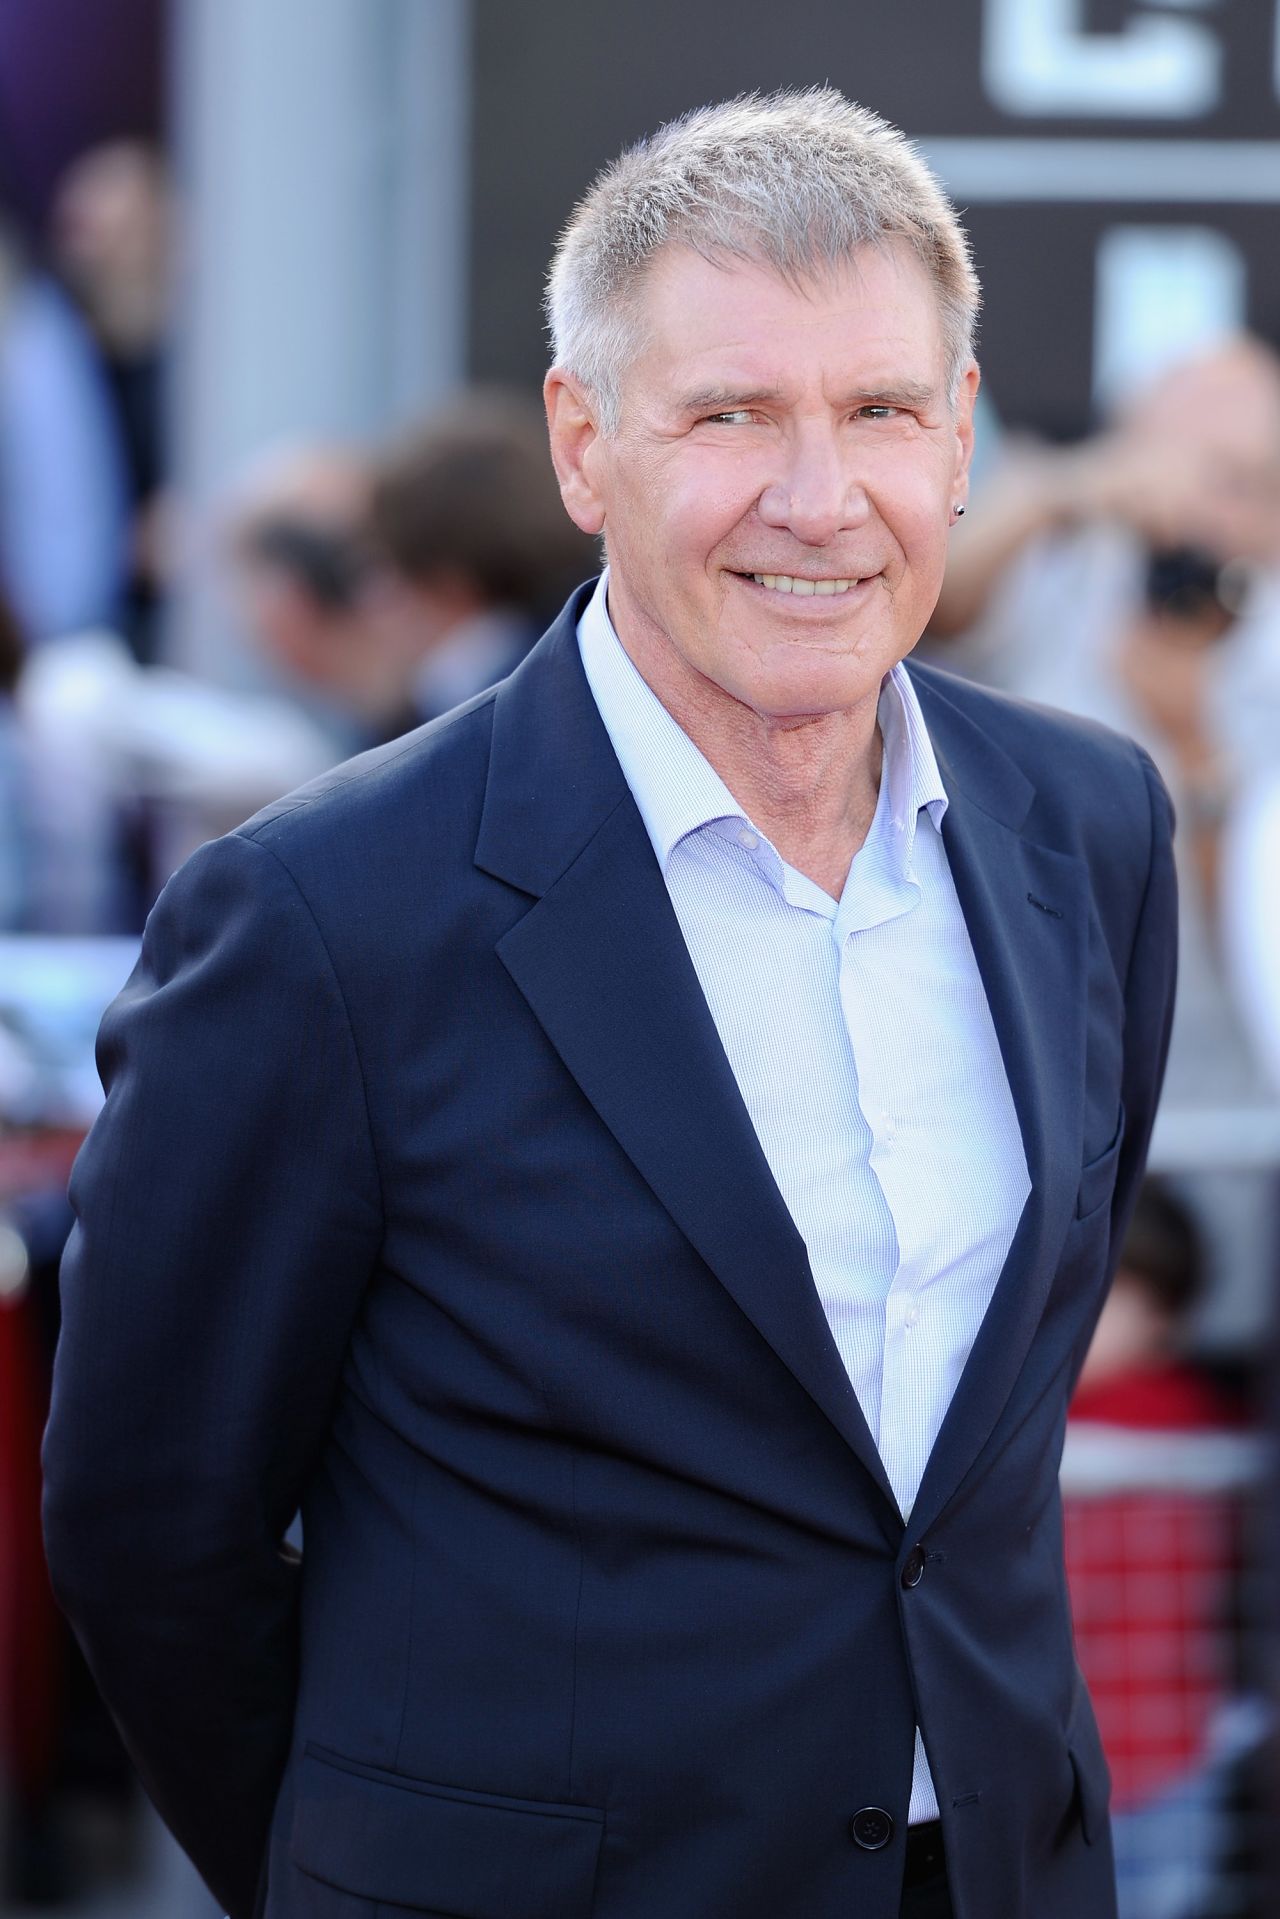 Since playing Han Solo, Harrison Ford has starred in flicks like "Witness," which earned him an Academy Award nomination, "Sabrina" and "Air Force One." He's also starred in the "Indiana Jones" franchise and 2011's "Cowboys & Aliens."